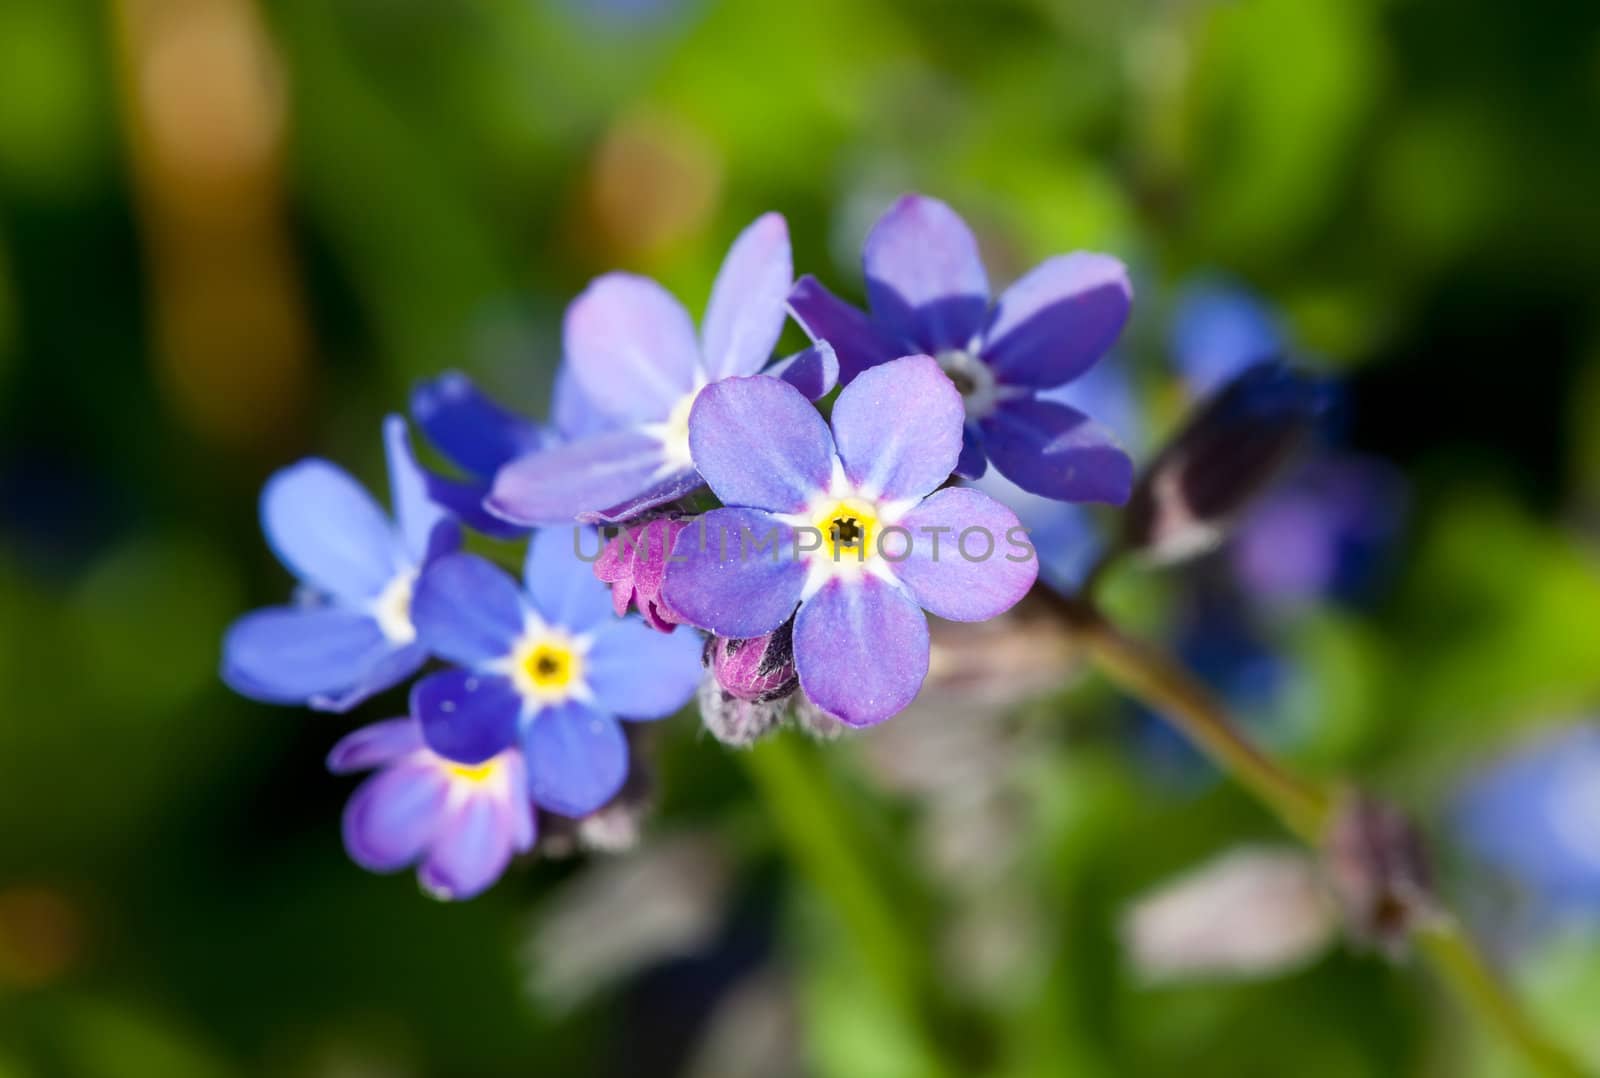 This image shows a macro from a Forget-me-not